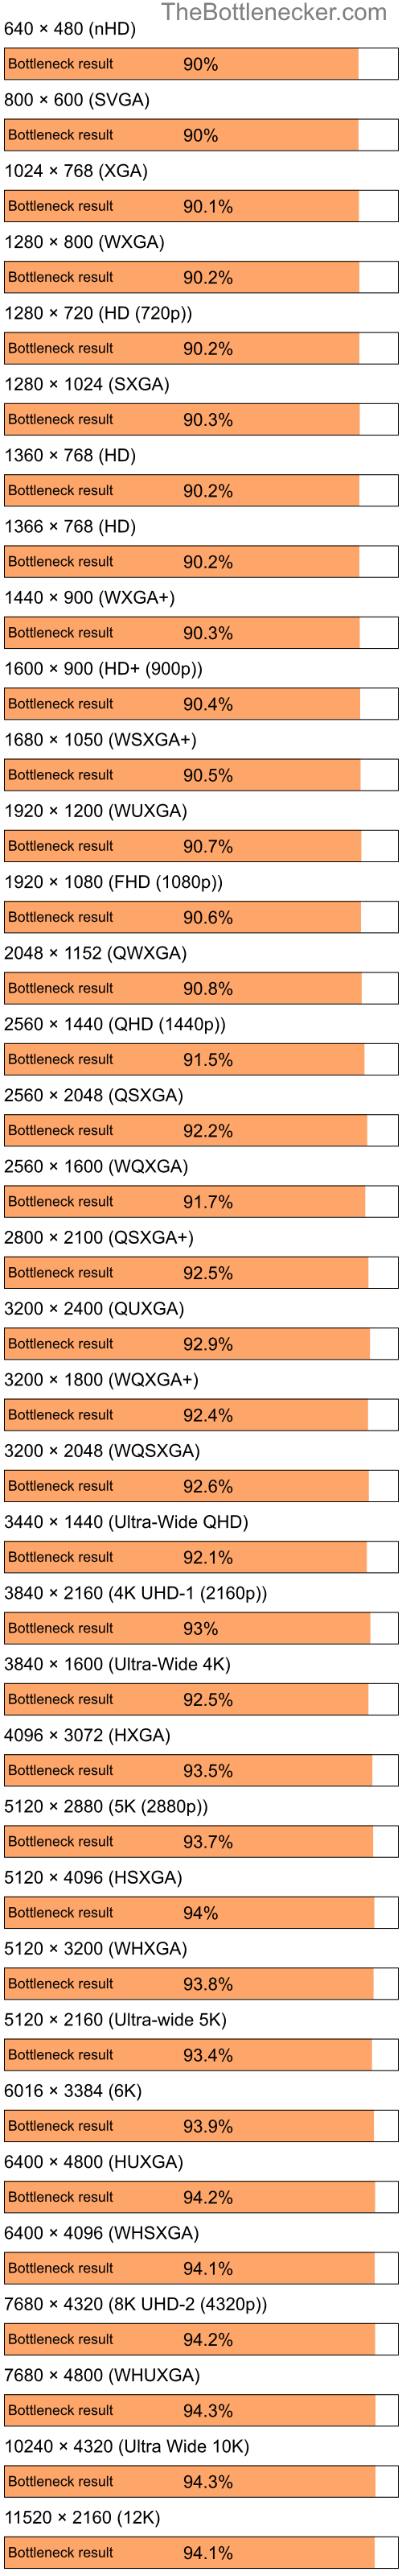 Bottleneck results by resolution for Intel Pentium 4 and NVIDIA GeForce4 Ti 4200 in Graphic Card Intense Tasks